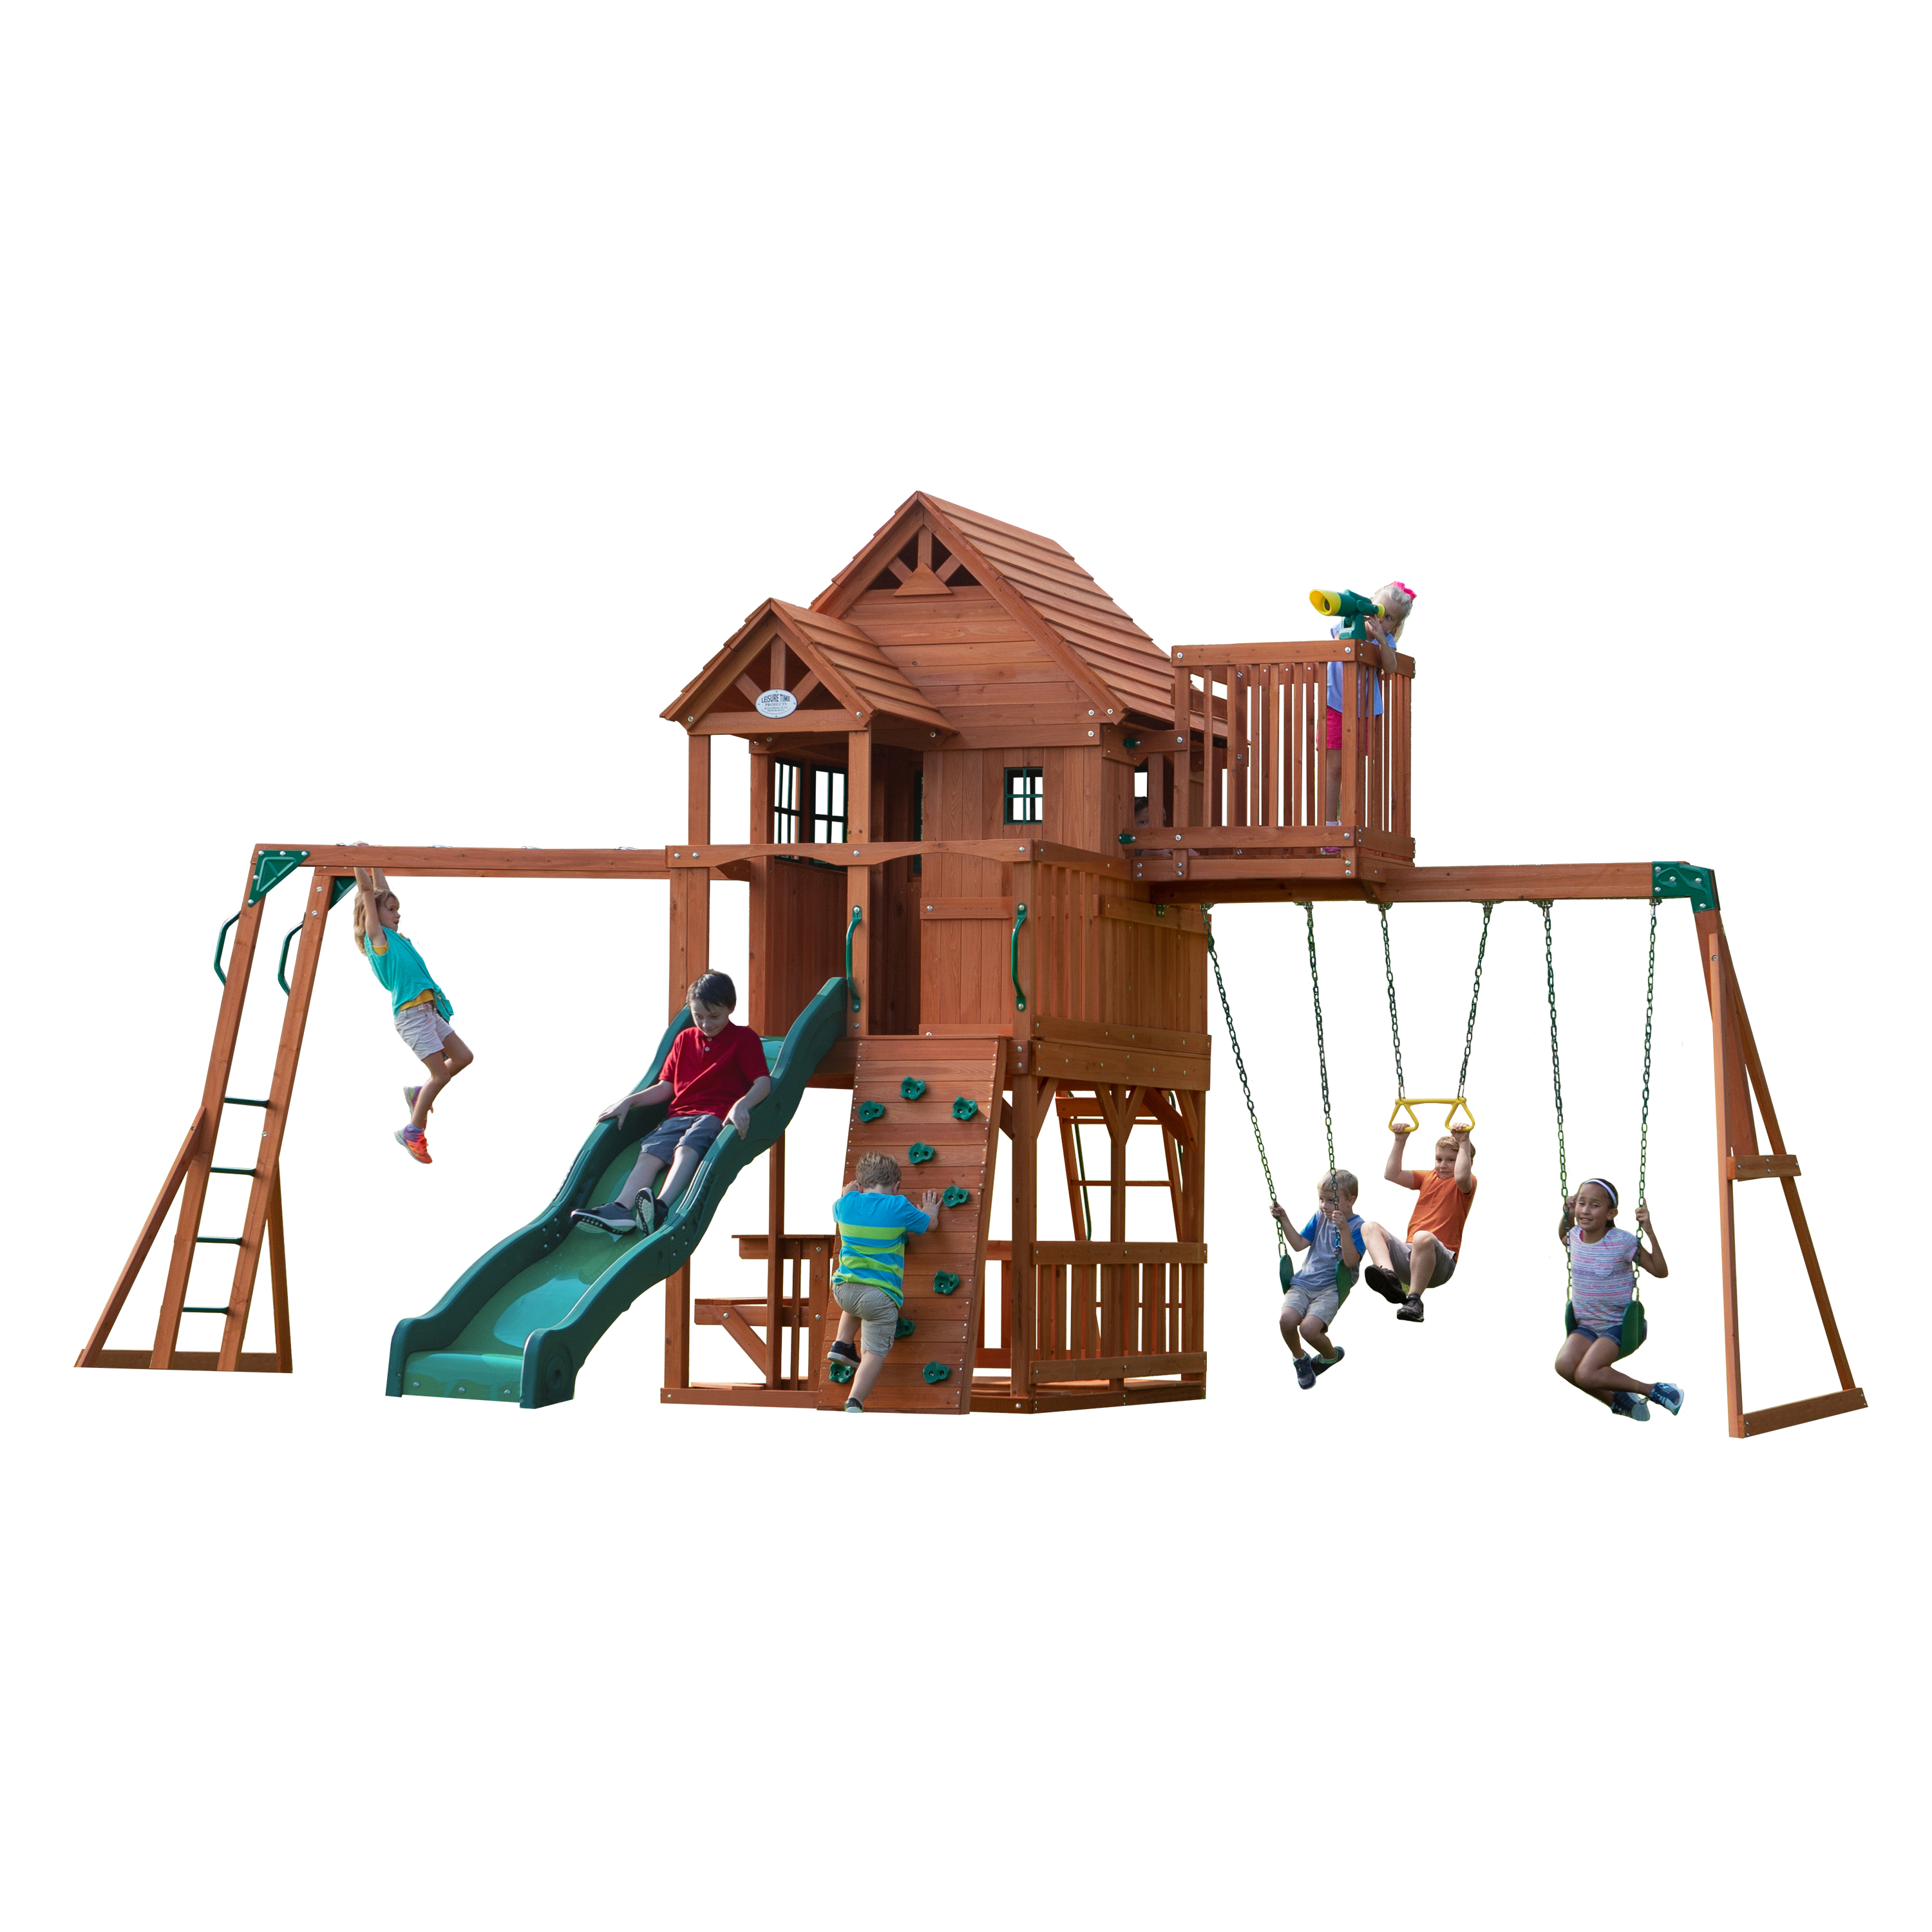 Skyfort II Swing Set with Slide, Climbing Frame and Lookout Tower